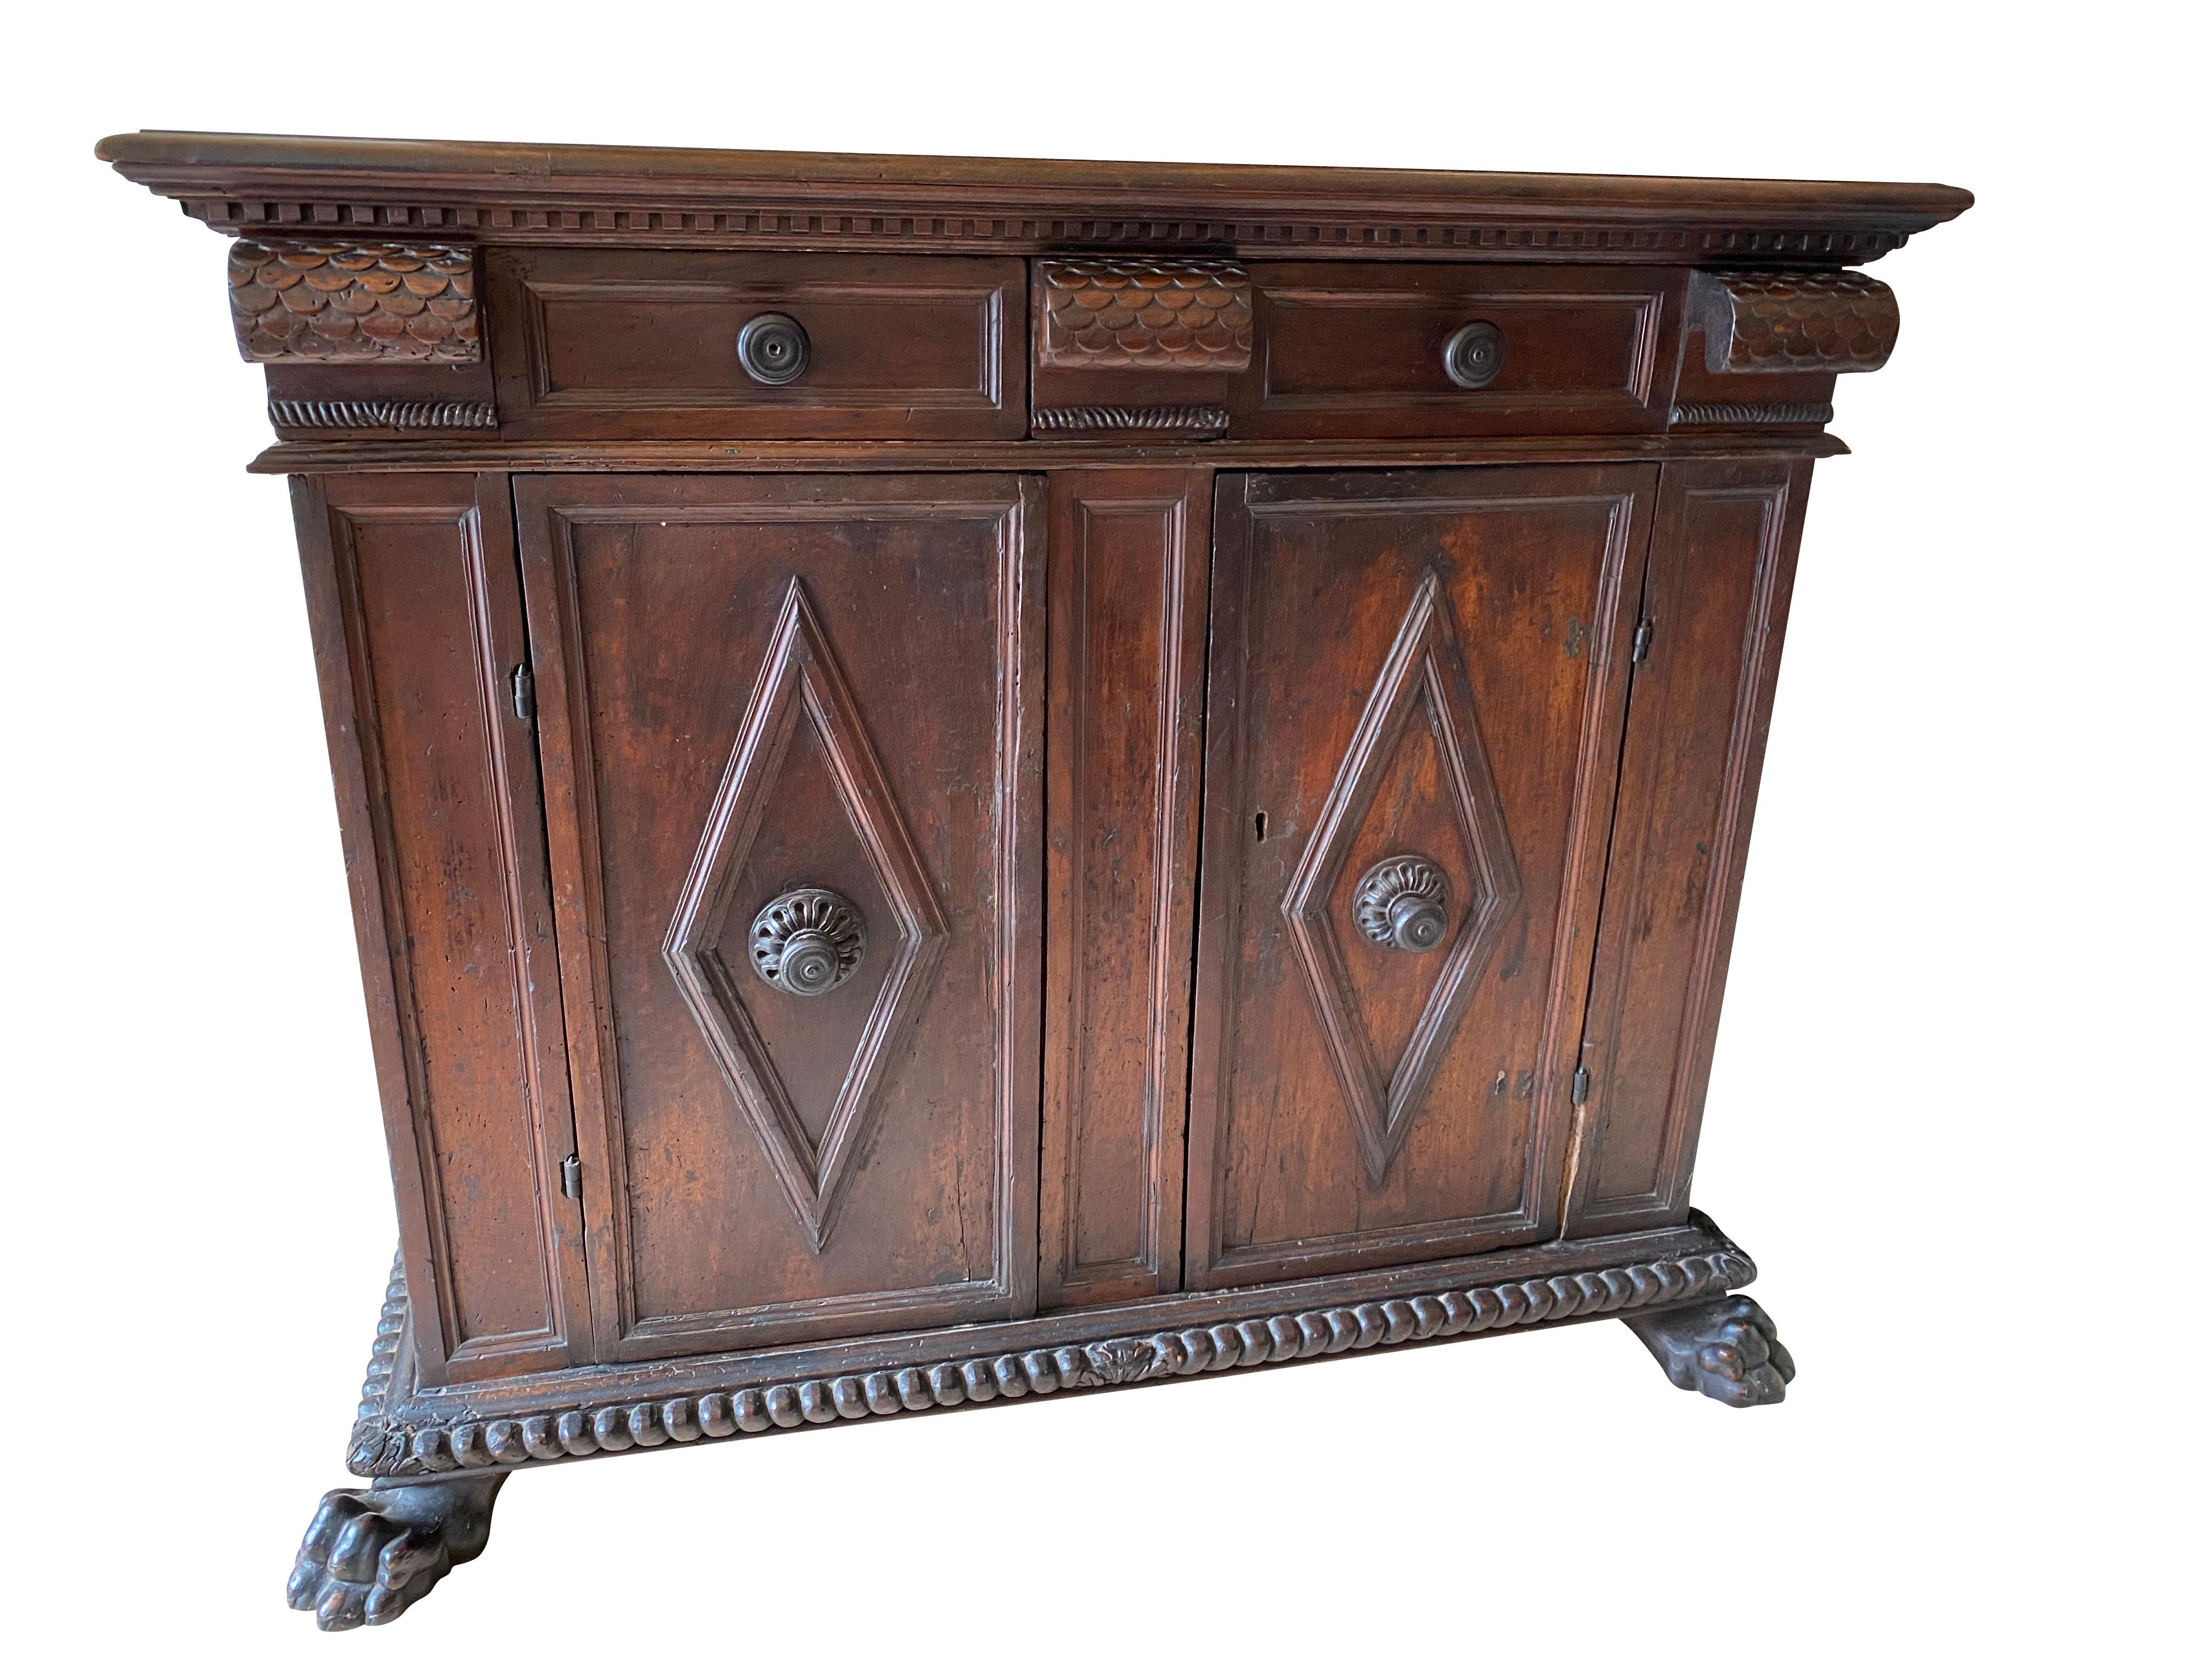 Rectangular molded top above two drawers with fish scale carved corbel form flanking drawers over a pair of paneled doors with diamond form applied molding, gadrooned carved base and lions paw feet.